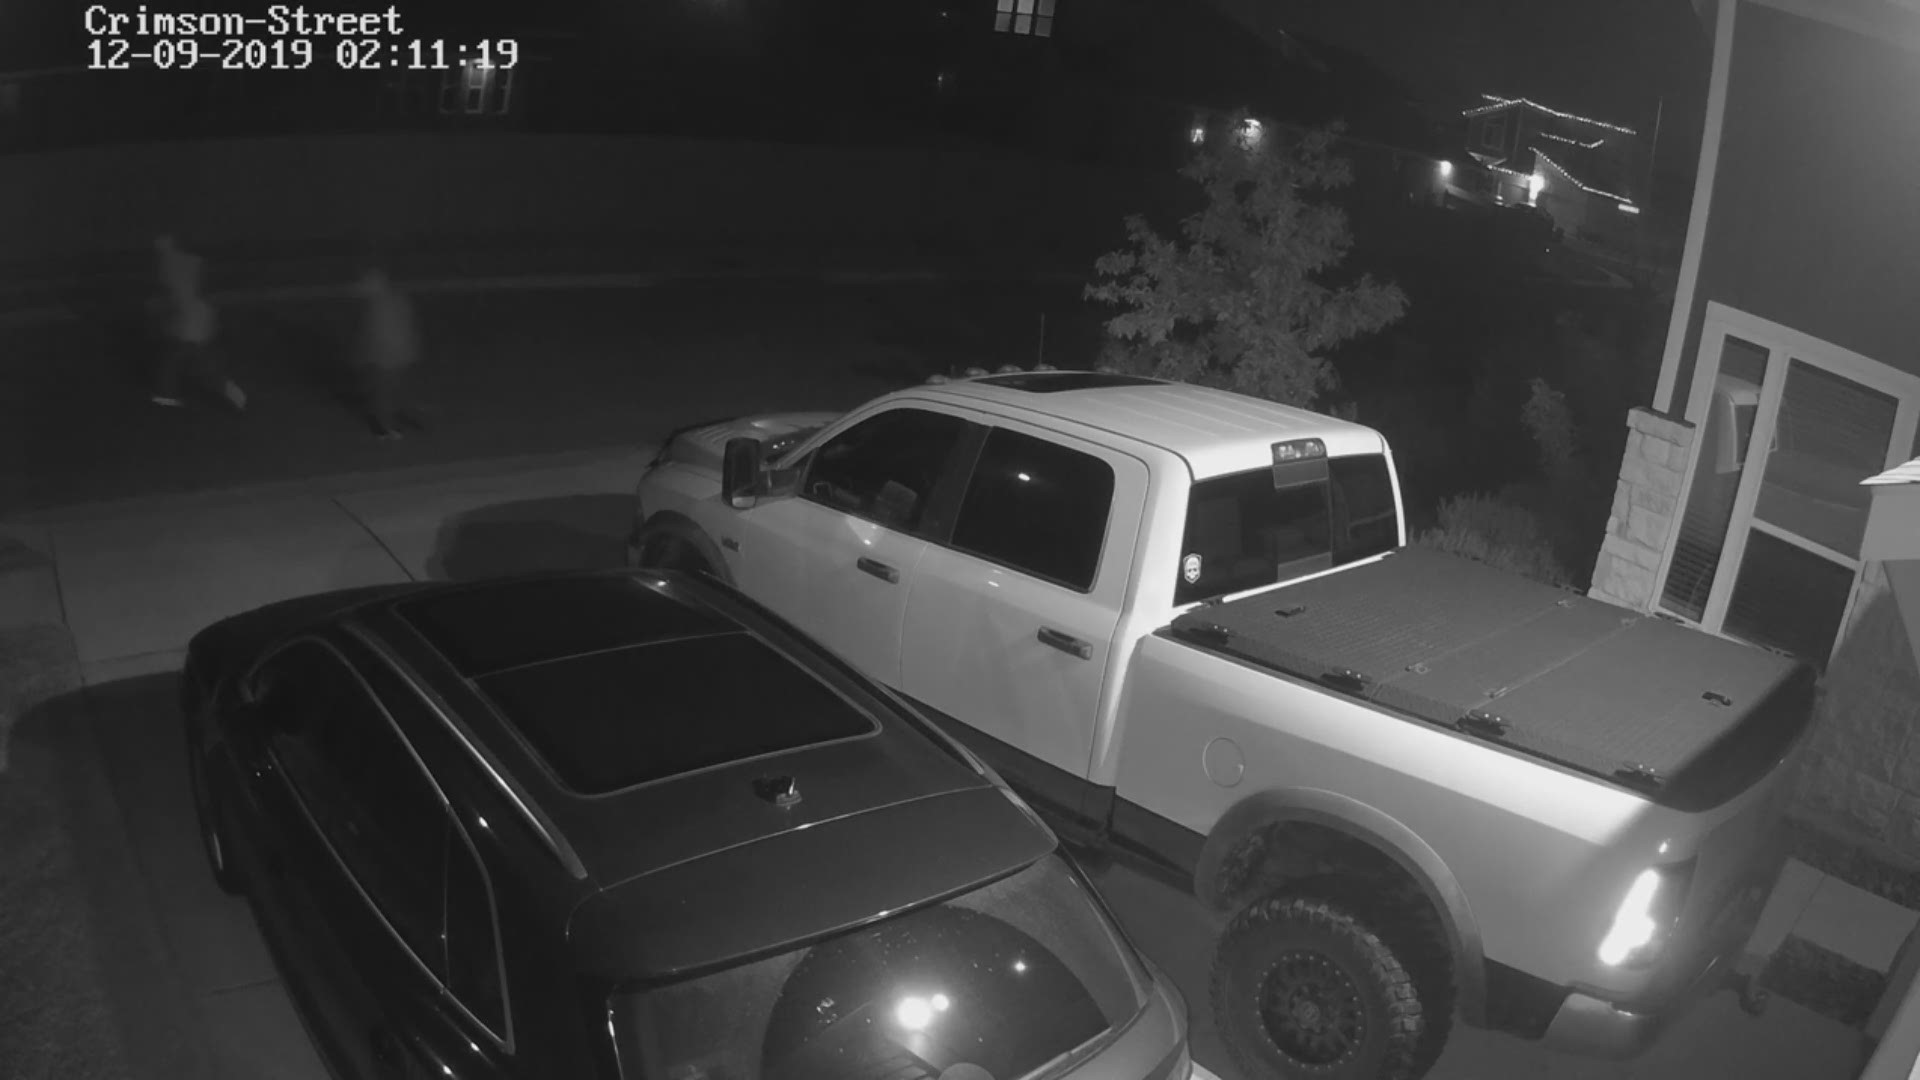 Neighbors in a southeast Austin neighborhood believe the thefts happened sometime between late Sunday night and early Monday morning. Credit: Alex Acosta.